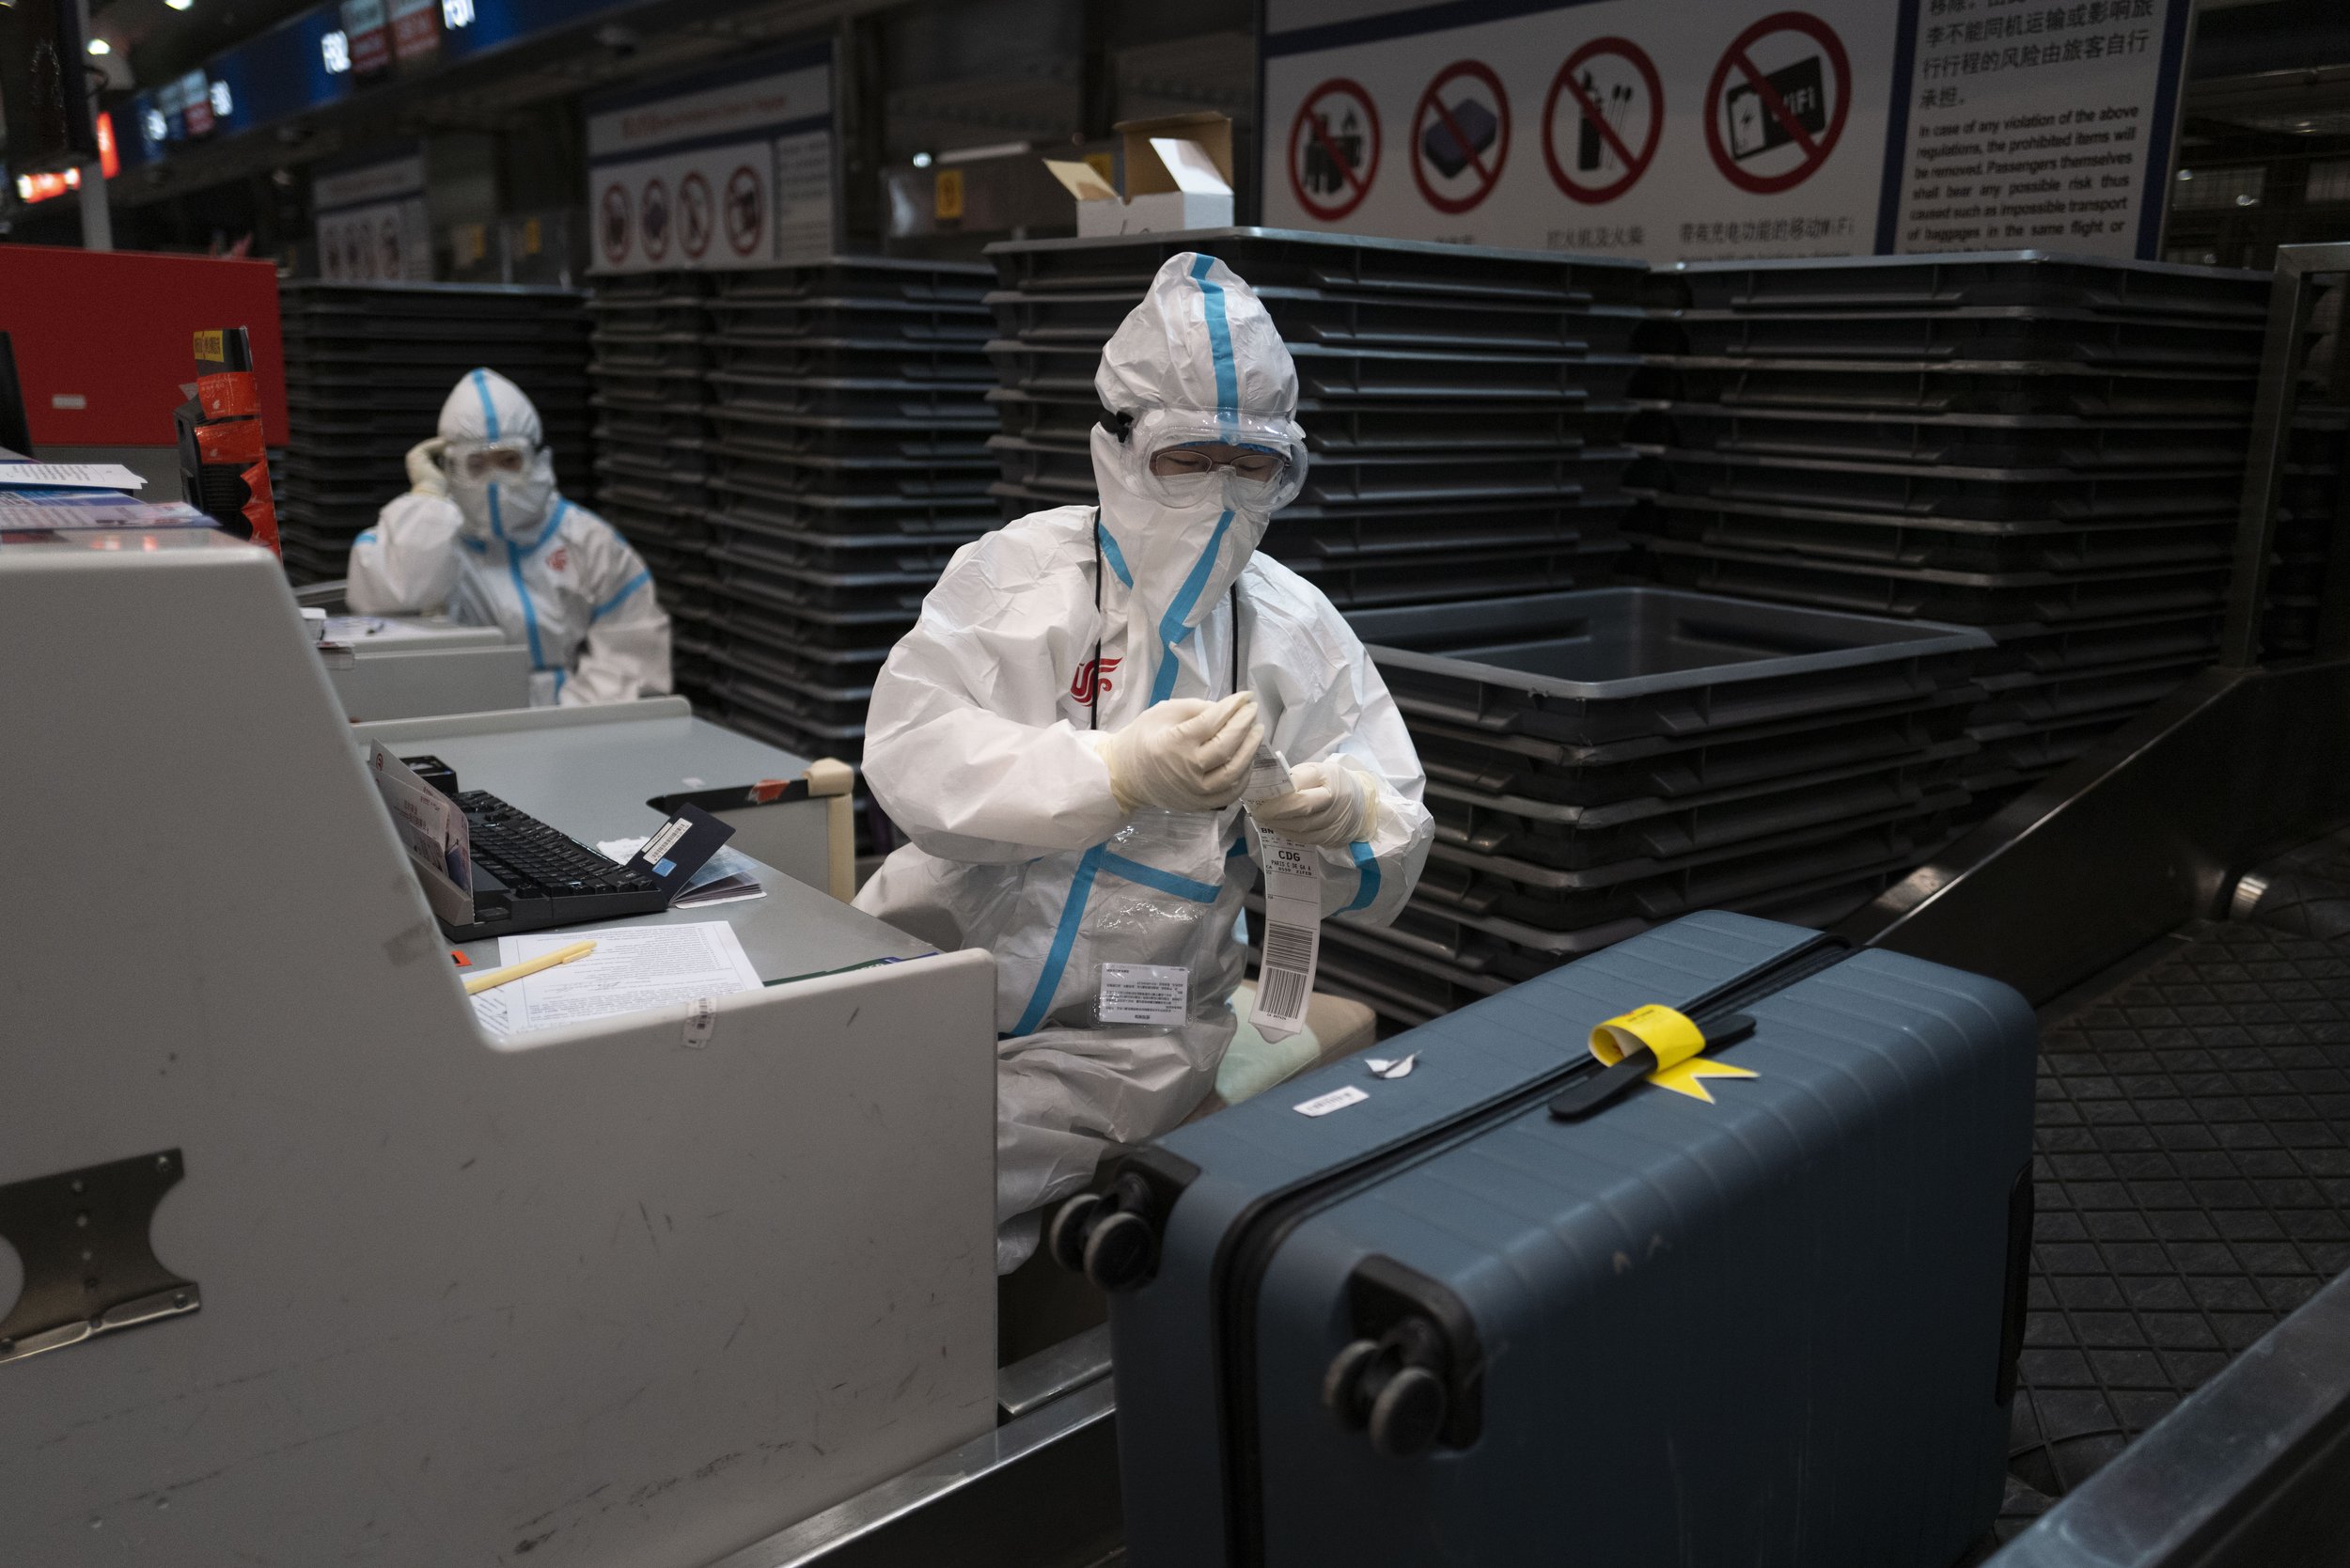  An airport employee in protective gear works at the Beijing Capital International Airport after the 2022 Winter Olympics, Monday, Feb. 21, 2022, in Beijing. (AP Photo/Jae C. Hong) 